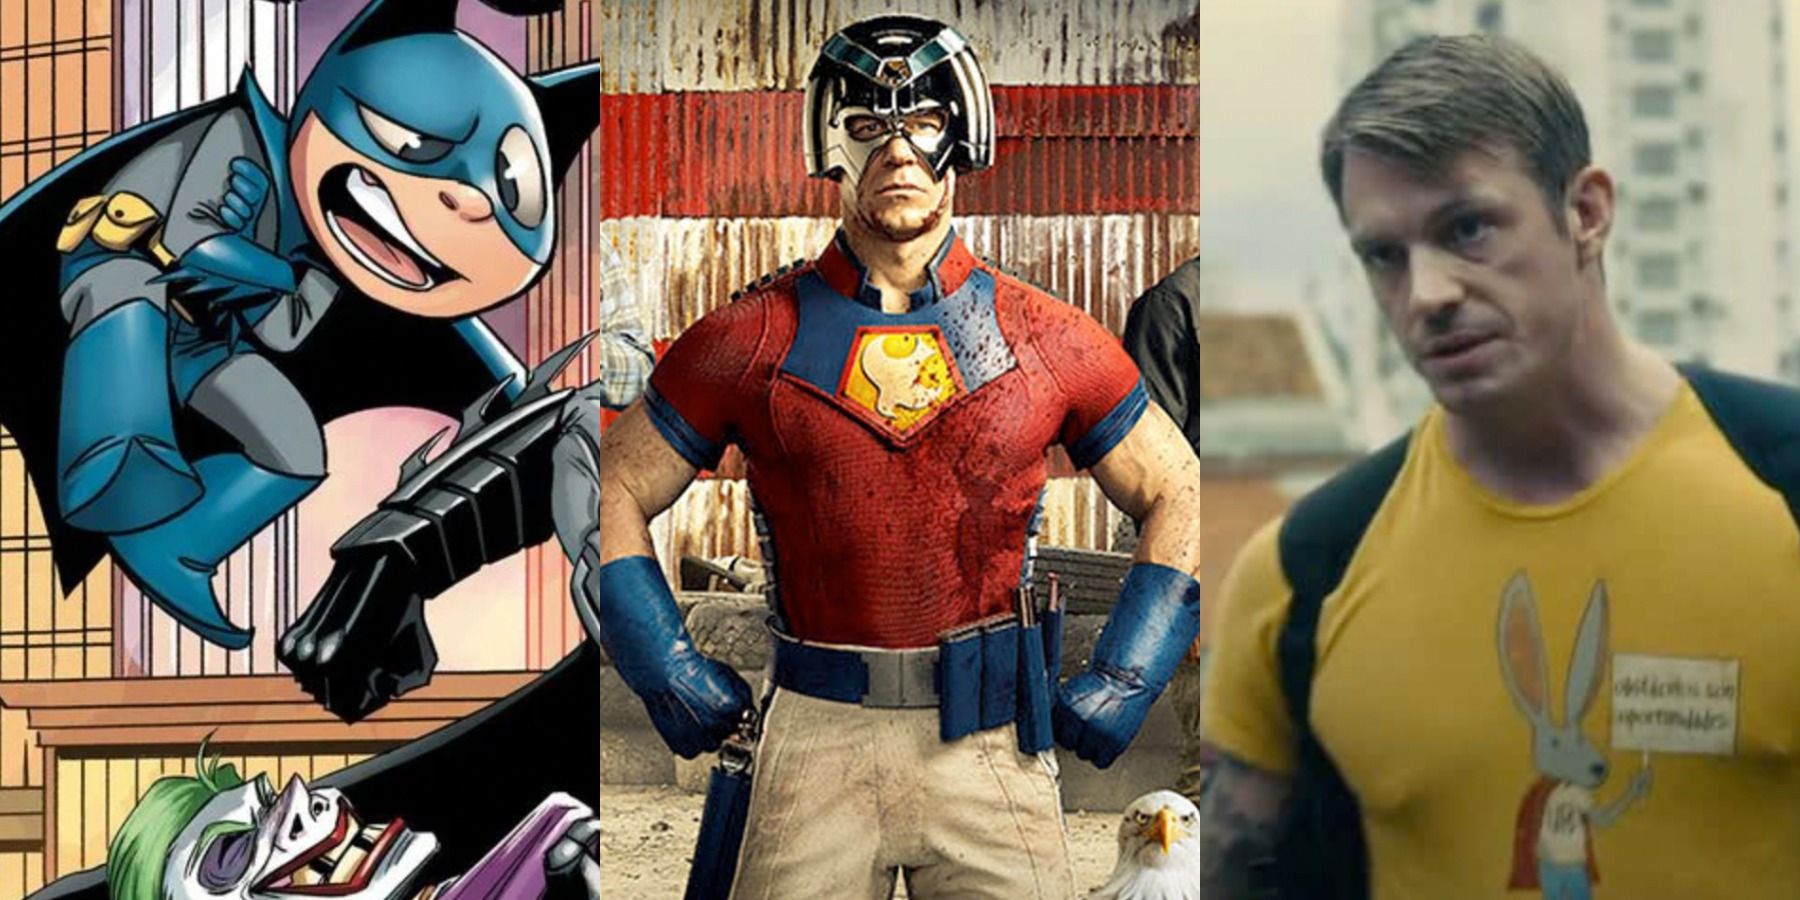 A split image depicts Bat-Mite in DC Comics, Peacemaker in the HBO Max series, and Rick Flagg in The Suicide Squad